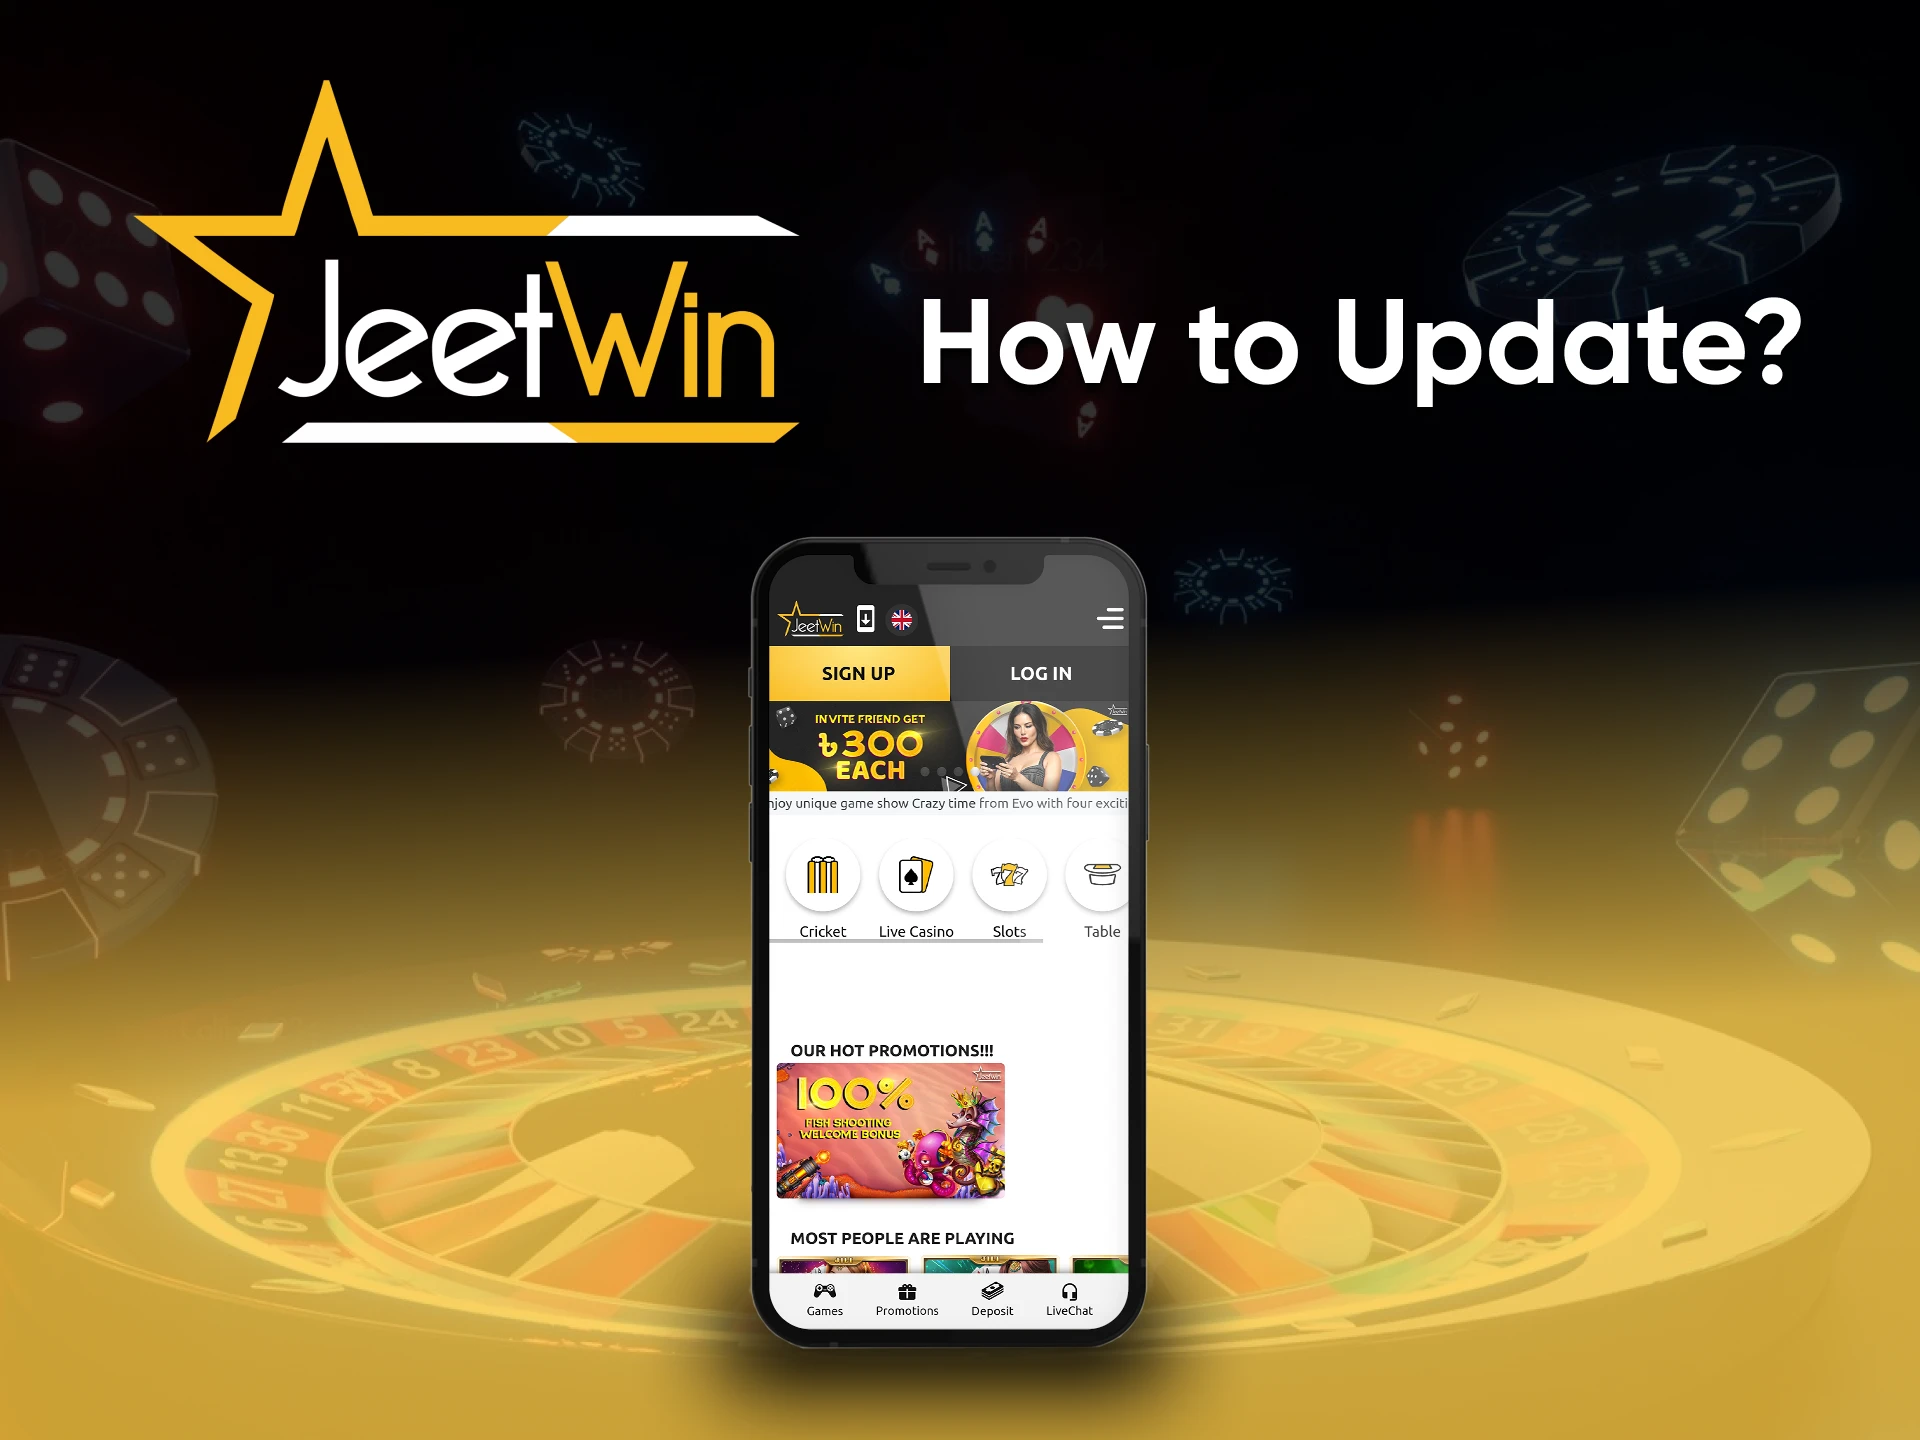 In order for the application to work properly, the Jeetwin team keeps updates in a timely manner.